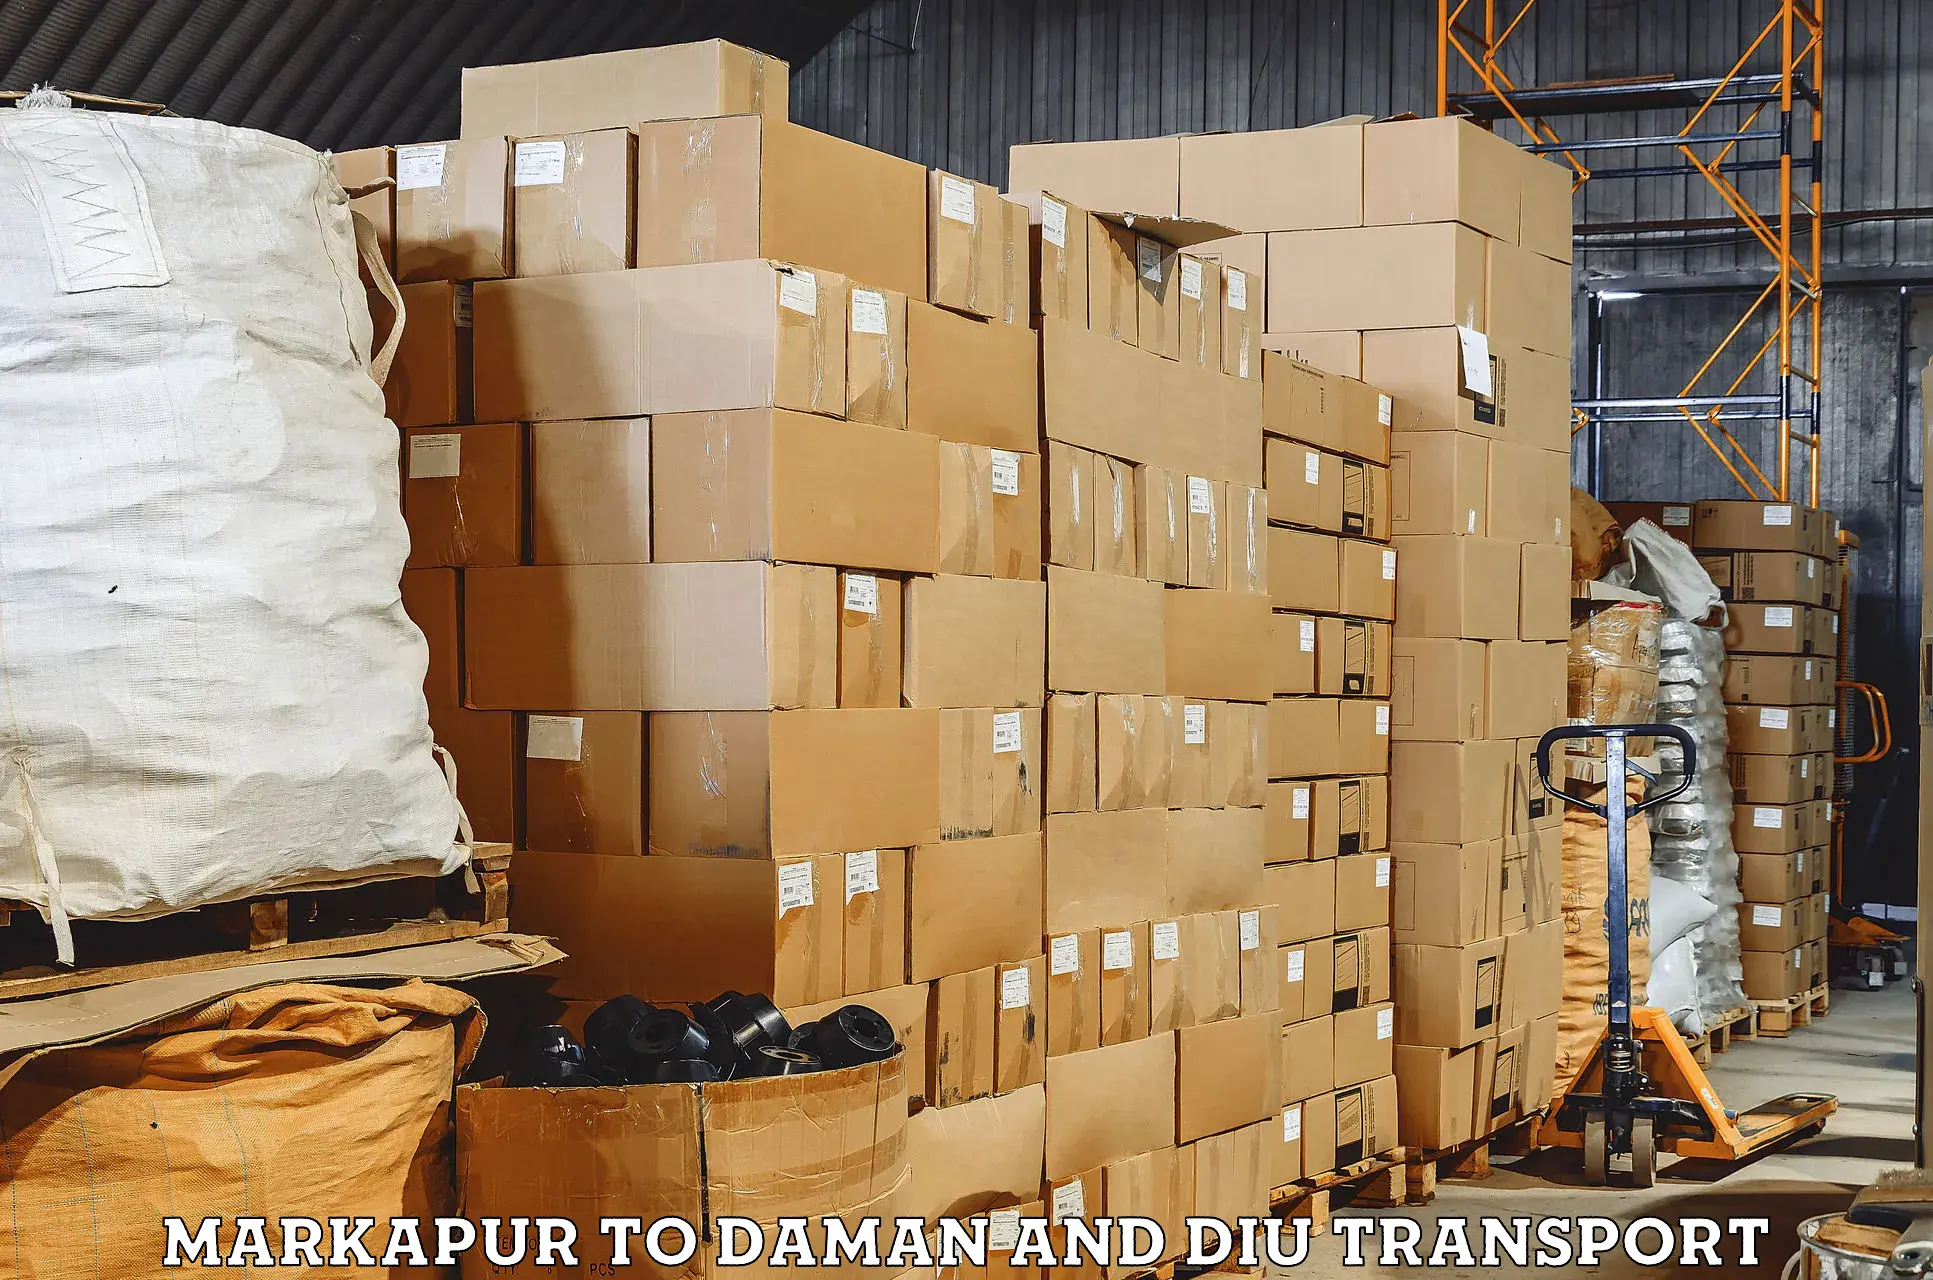 Transport shared services Markapur to Daman and Diu